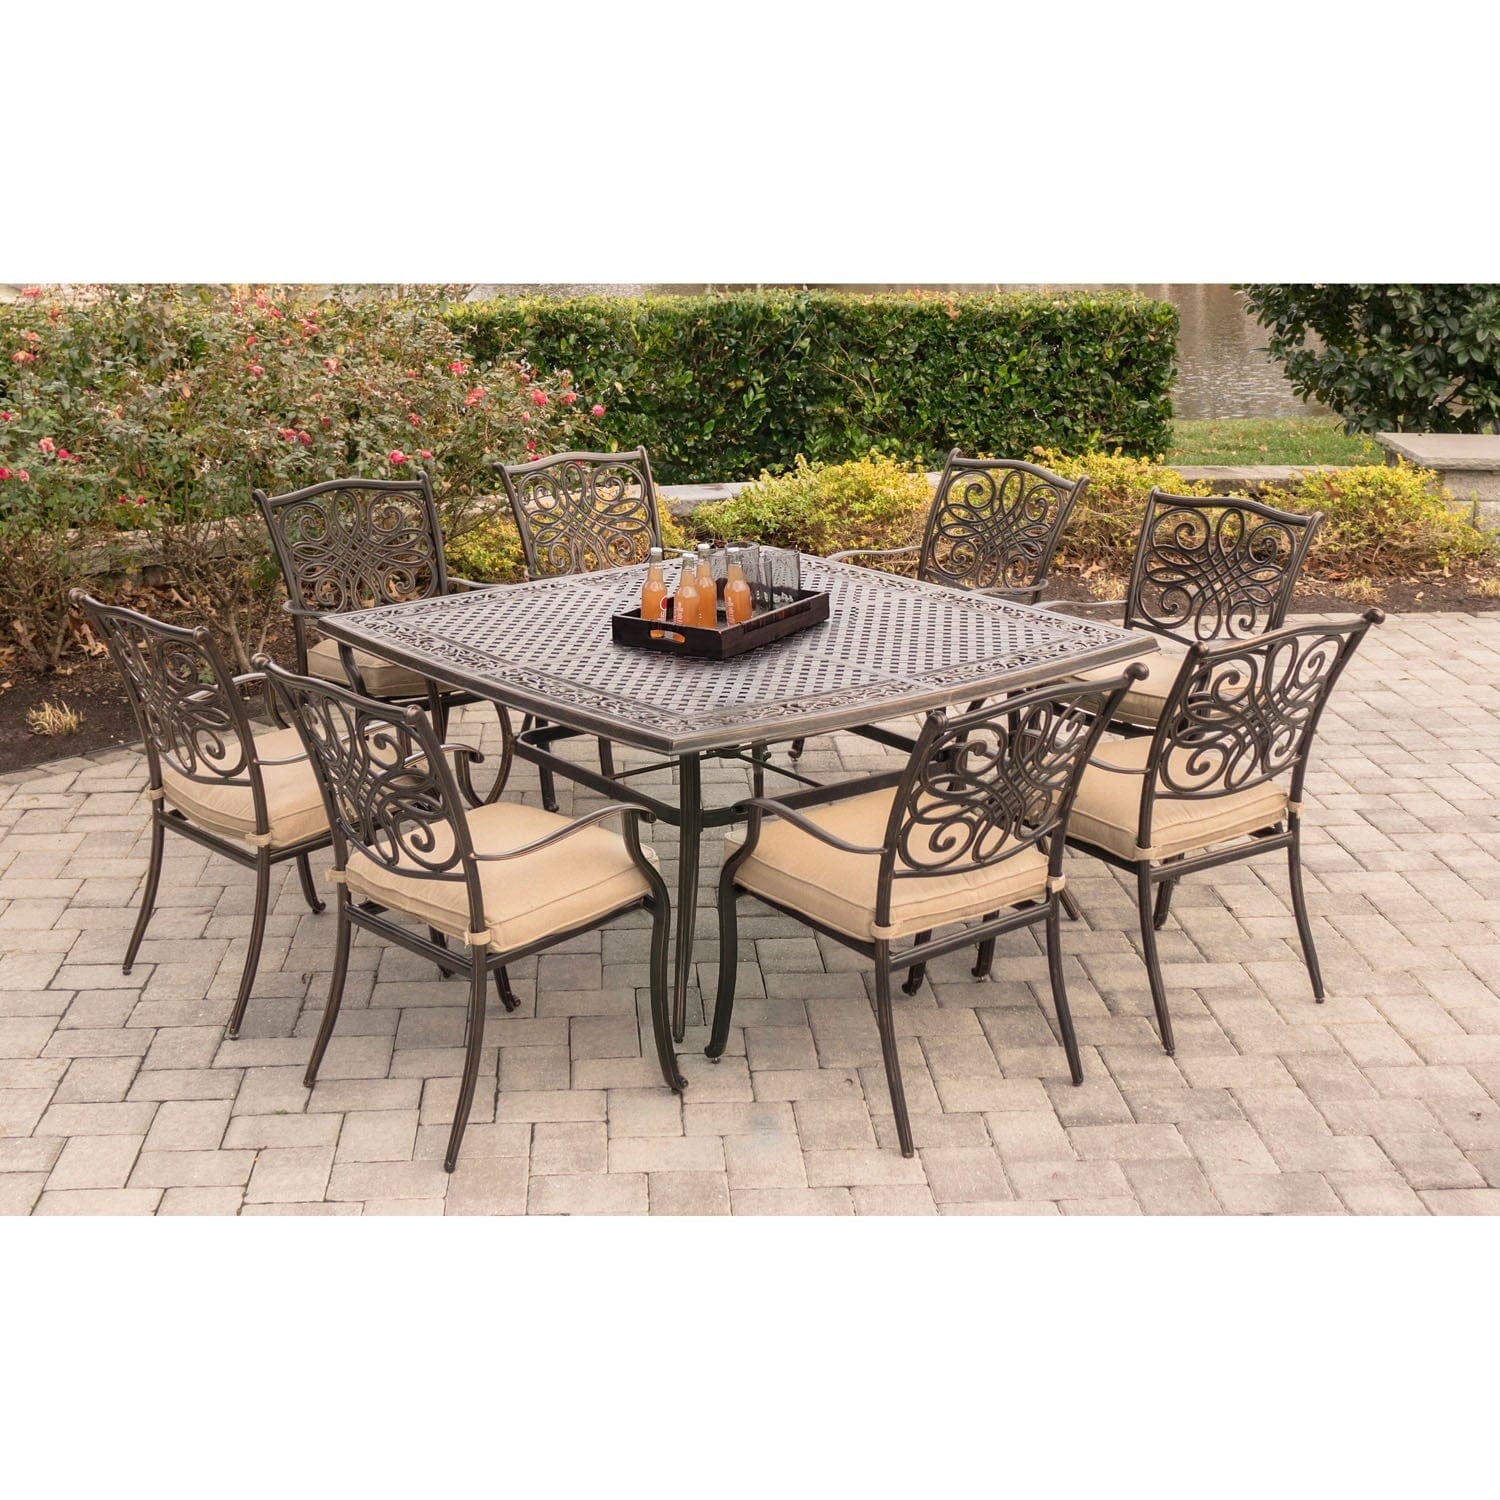 Hanover Outdoor Dining Set Hanover - Traditions 9-Piece Aluminum Frame Square Dining Set in Tan with a Large 60 x 60 in. Cast-top Dining Table | TRADDN9PCSQ